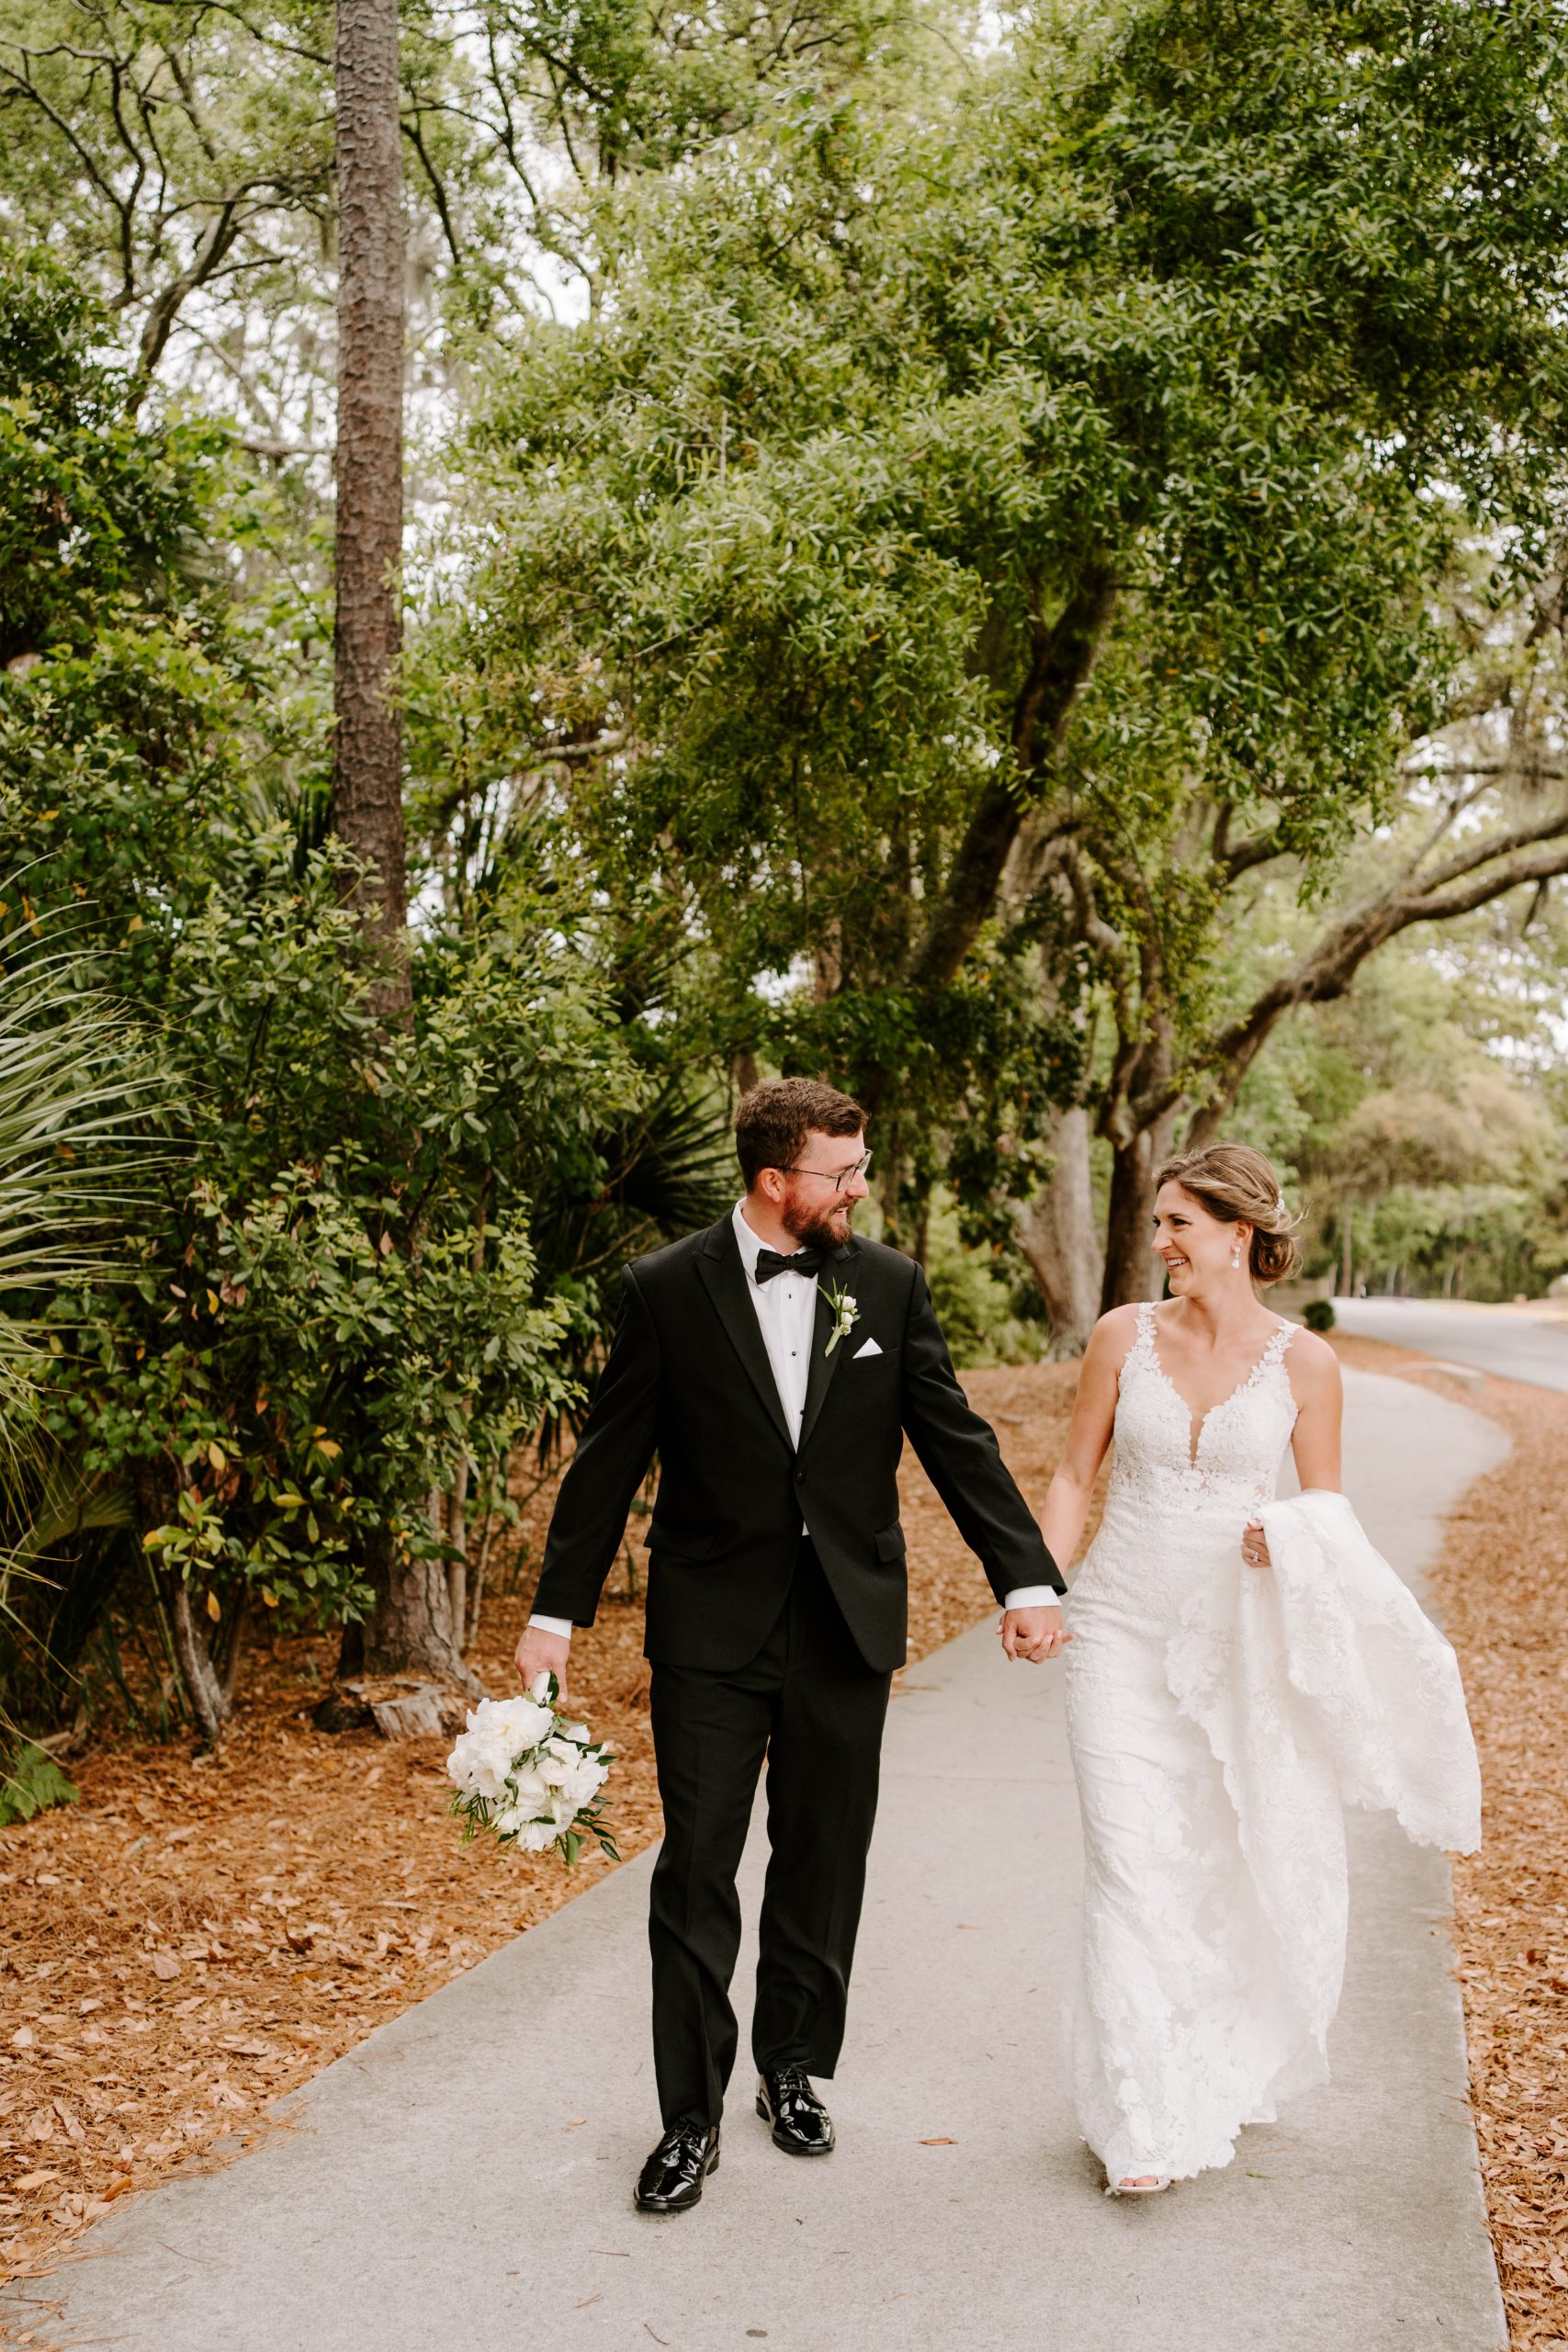 Hilton Head Island was the destination for Jen Semans’ and John Hines’ April 24 wedding. The ceremony was at Providence Presbyterian Church with the reception following at the Shorehouse at the Omni Hilton Head Oceanfront Resort.
